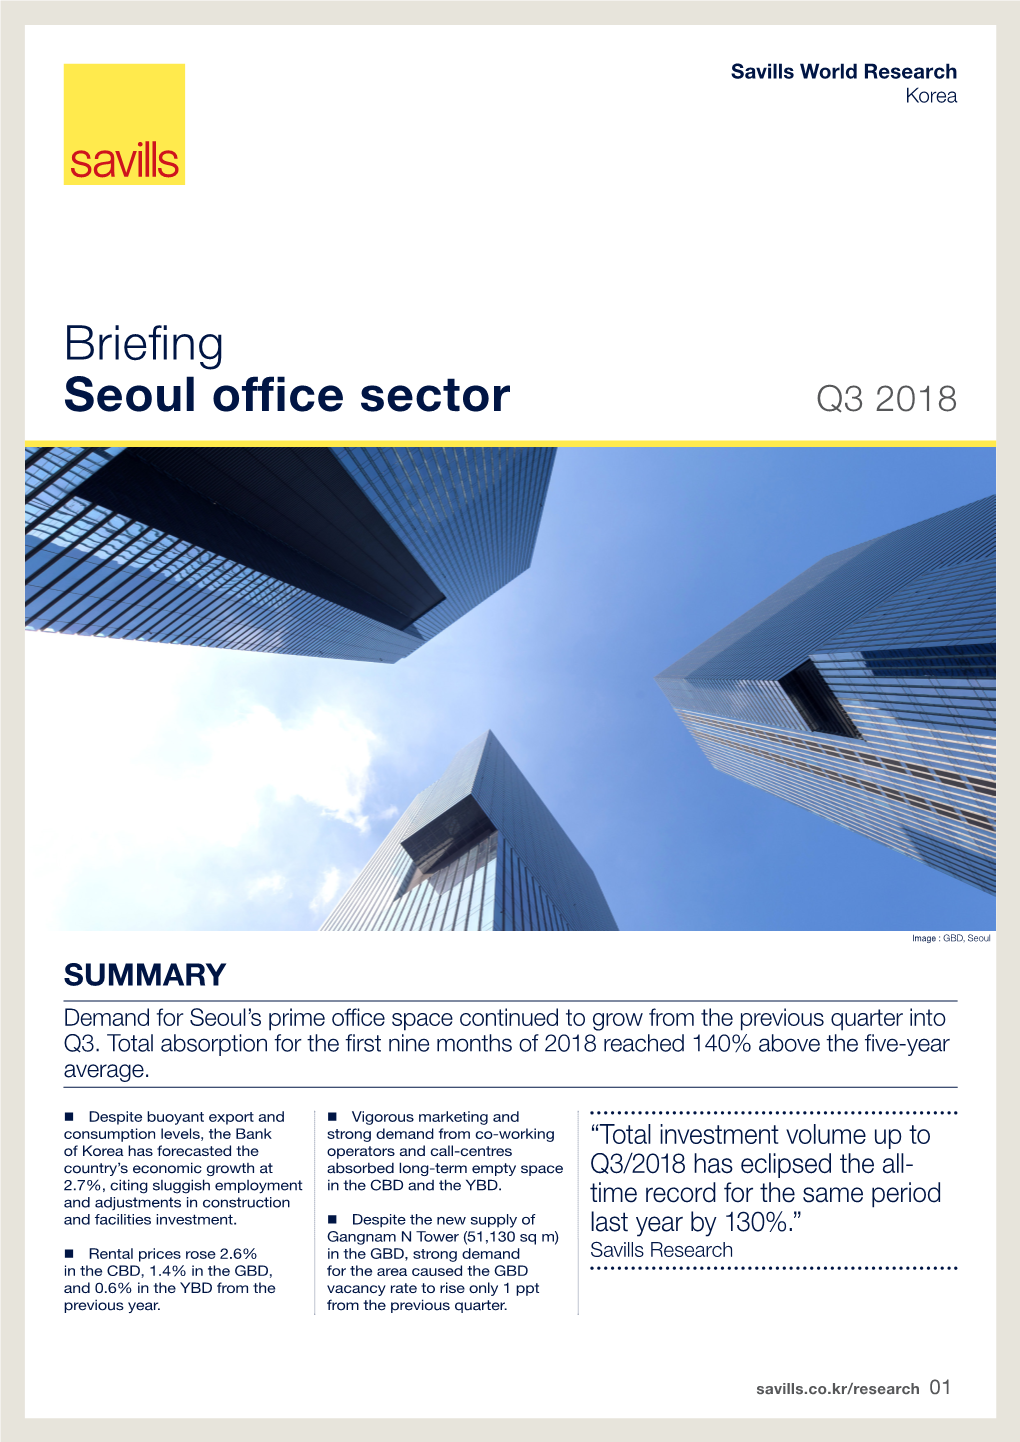 Briefing Seoul Office Sector Q3 2018